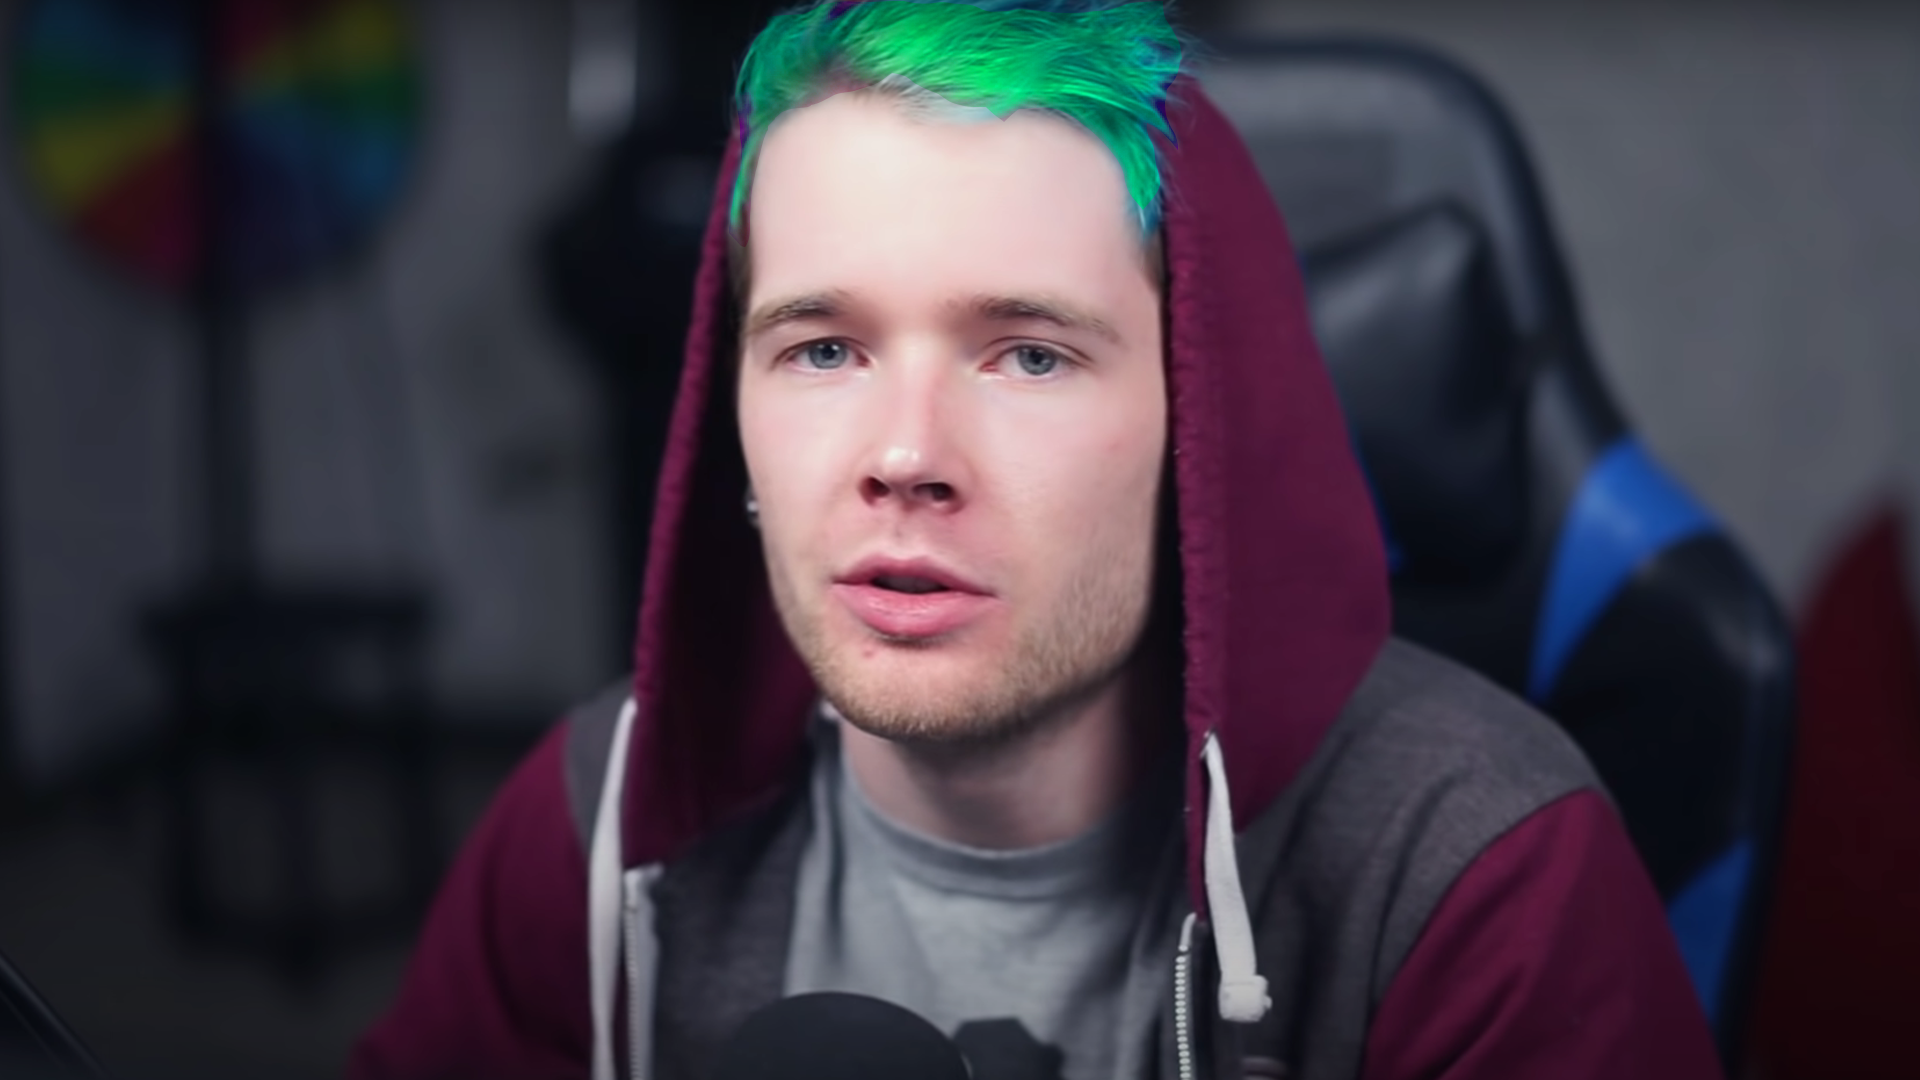 2. How to Achieve Dantdm's Iconic Blue Hair Look - wide 9